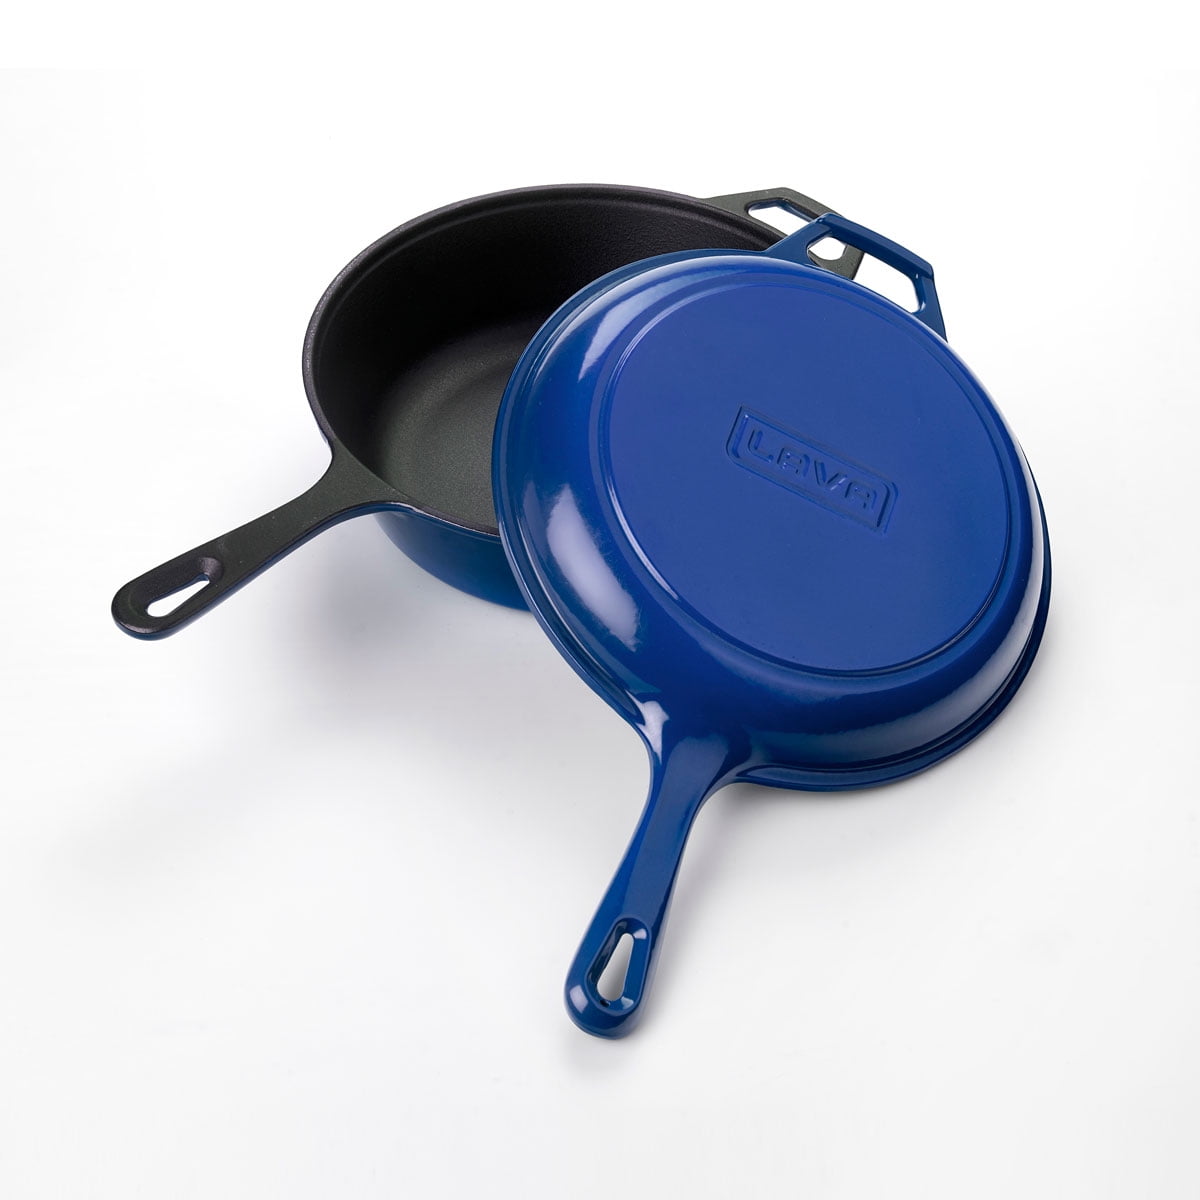 Why Choose Enamel Coated Cast Iron Cookware ?